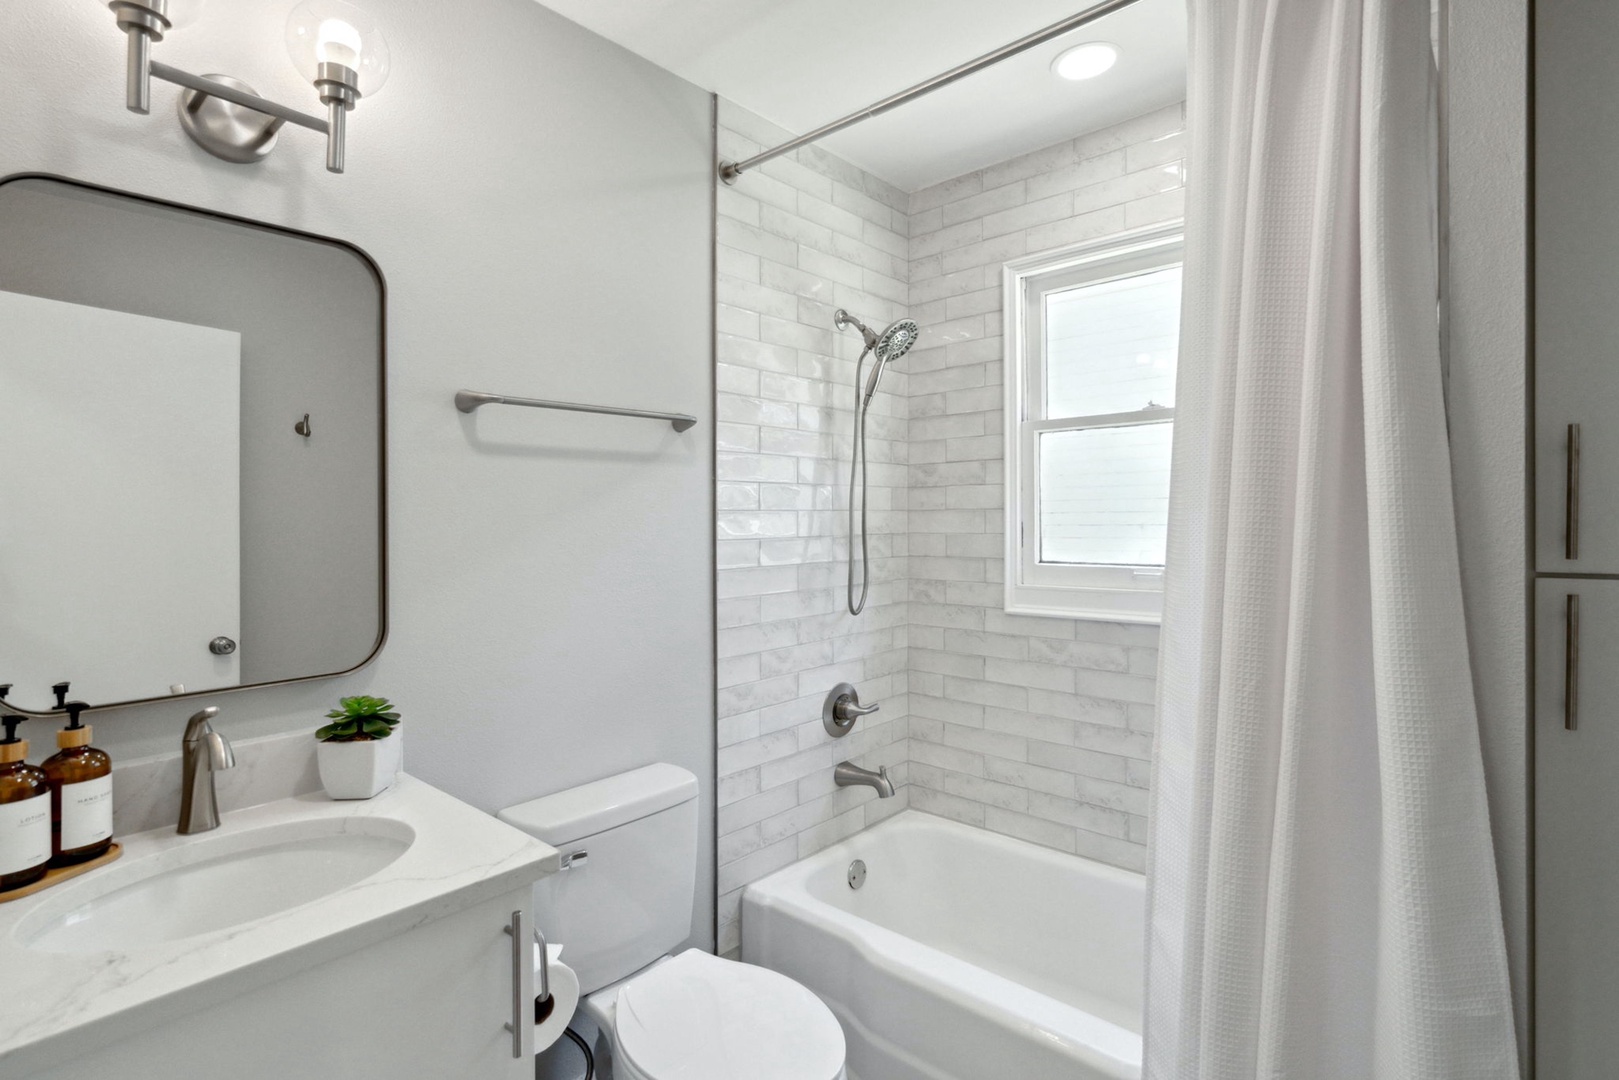 A single vanity & shower/tub combo await in the updated full bathroom